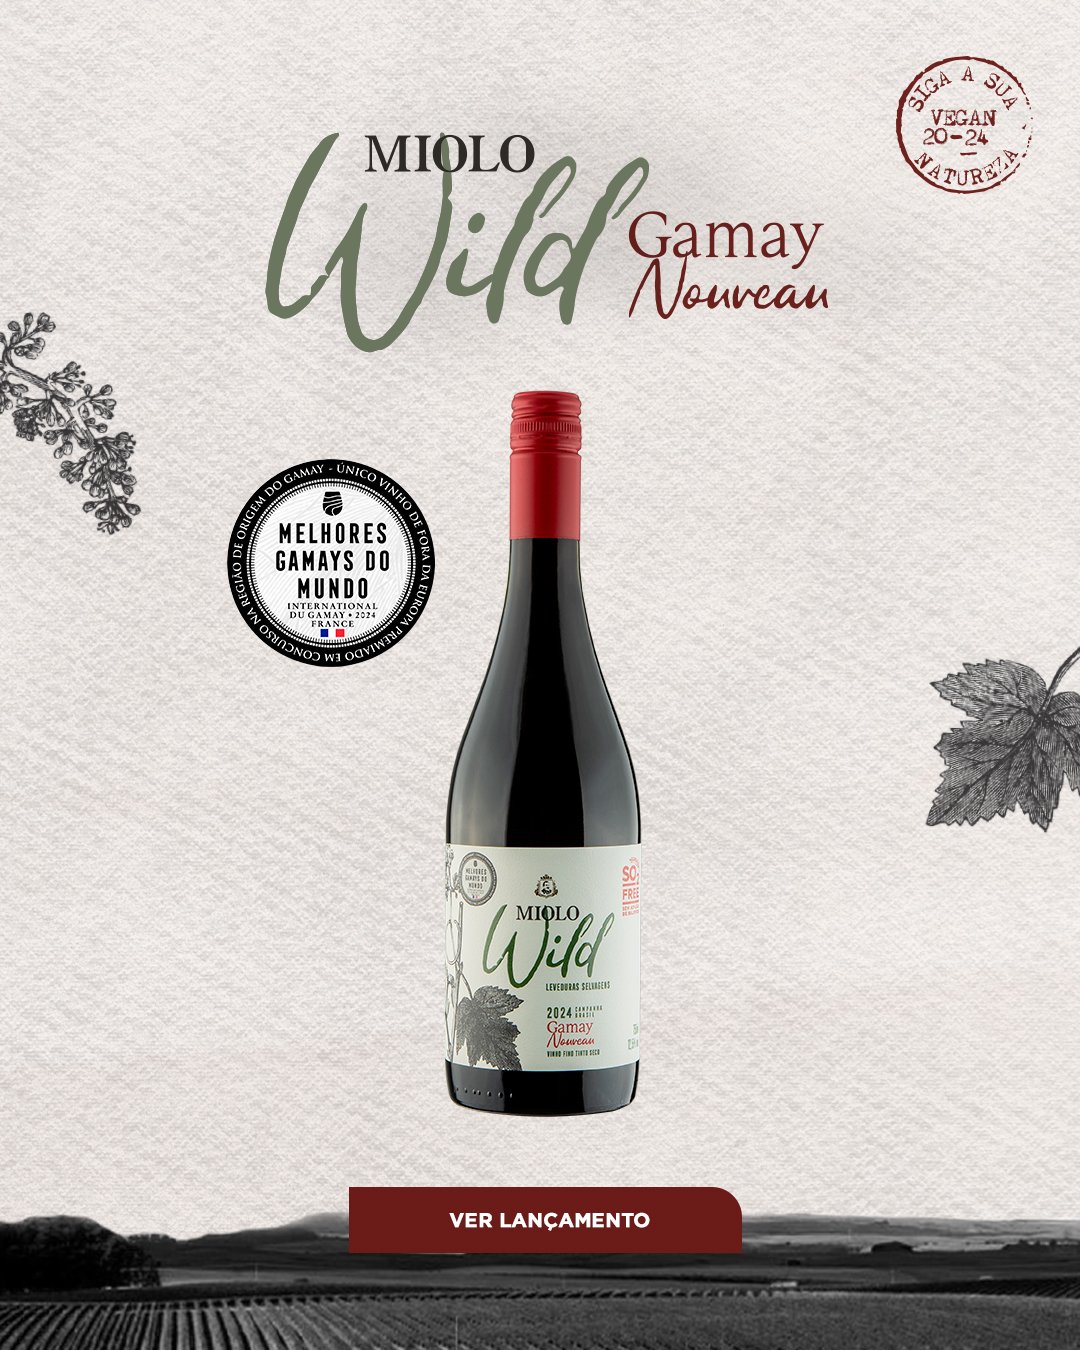 202403-ecom-miolo-gamay-home-m